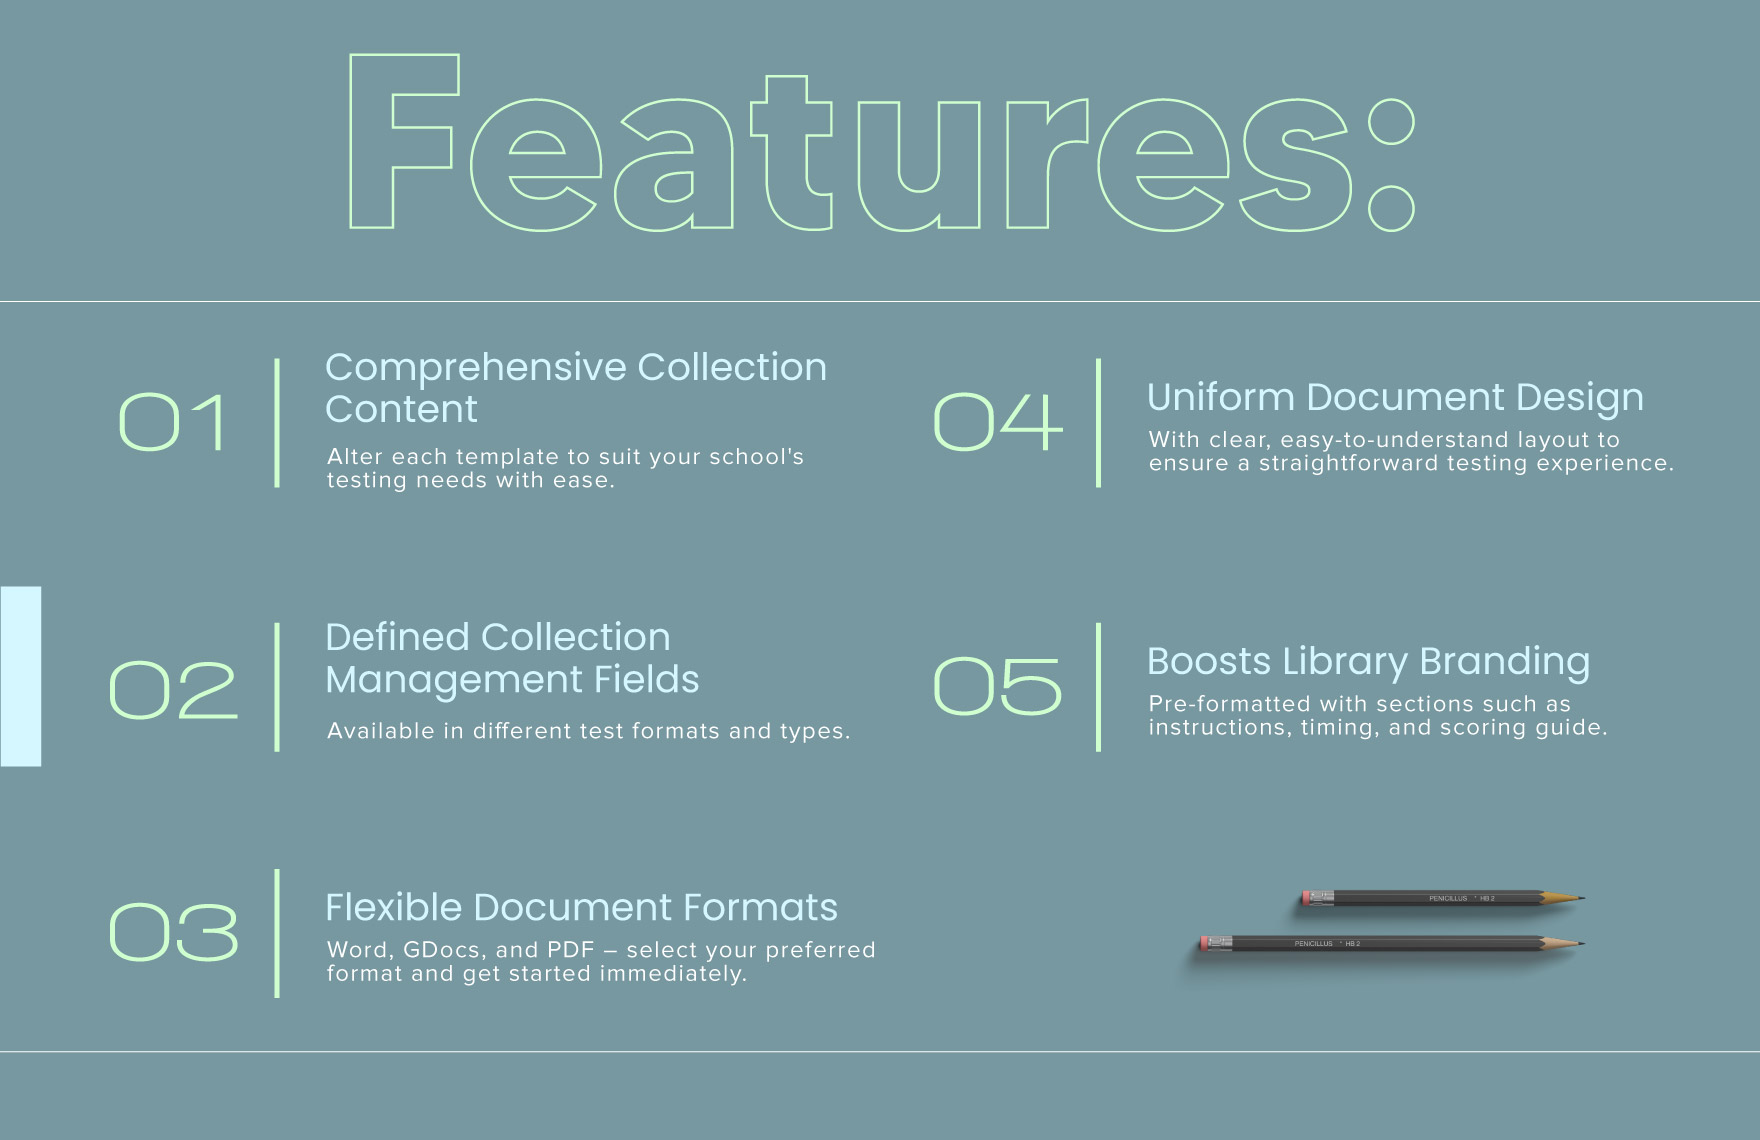 10 Education Library Collection Management Template Bundle